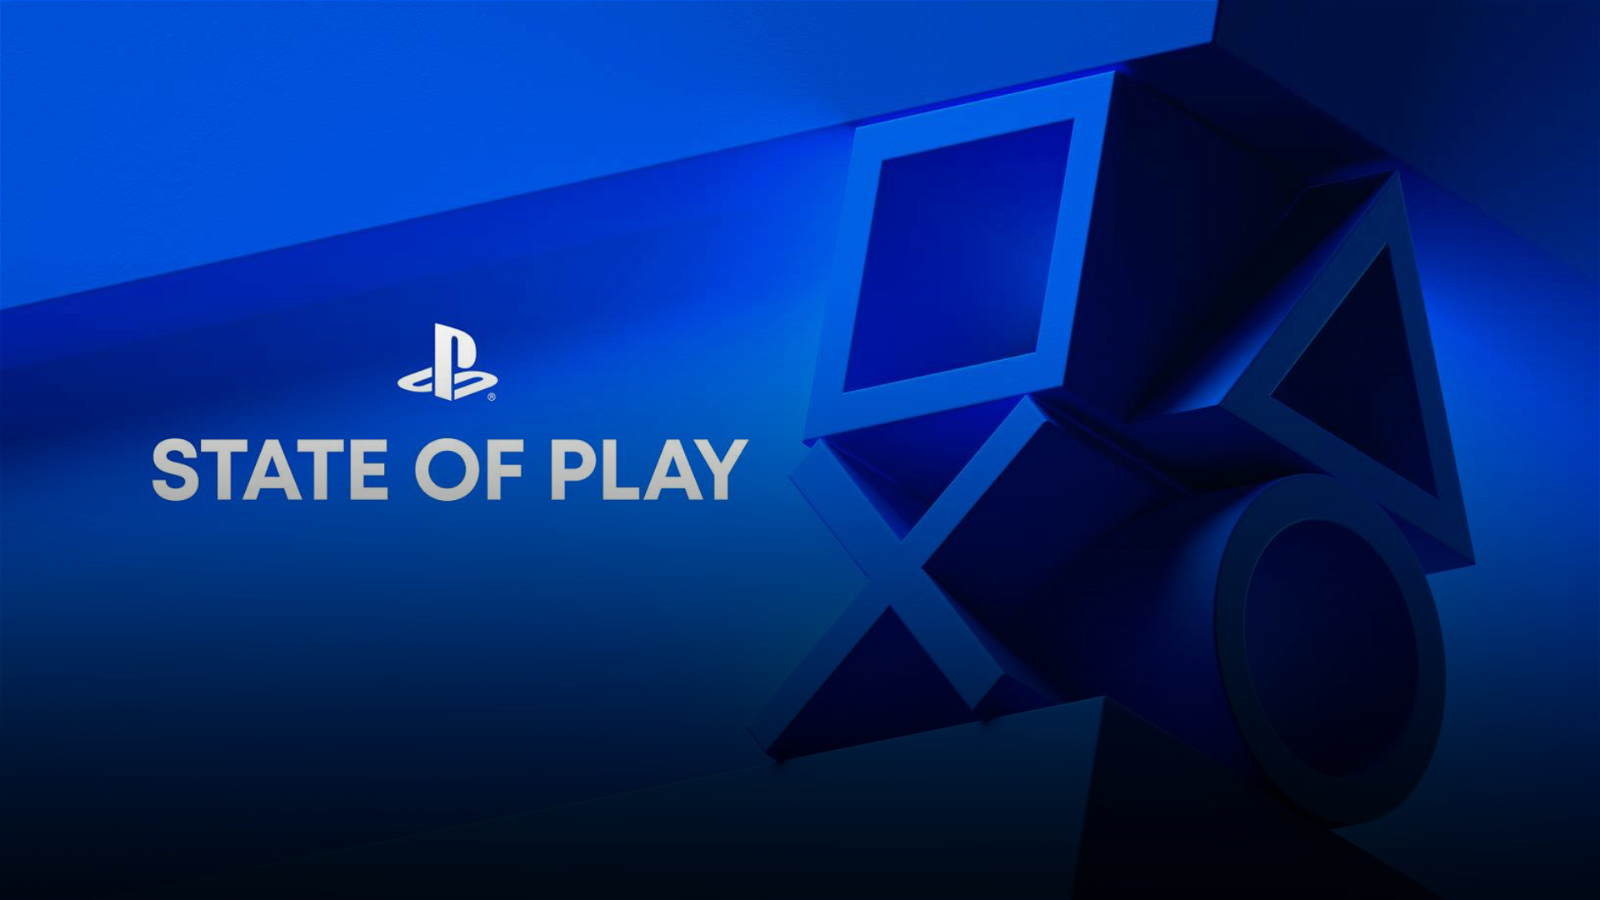 Sony Announces the Next PlayStation State of Play, Set to Feature 14 Games